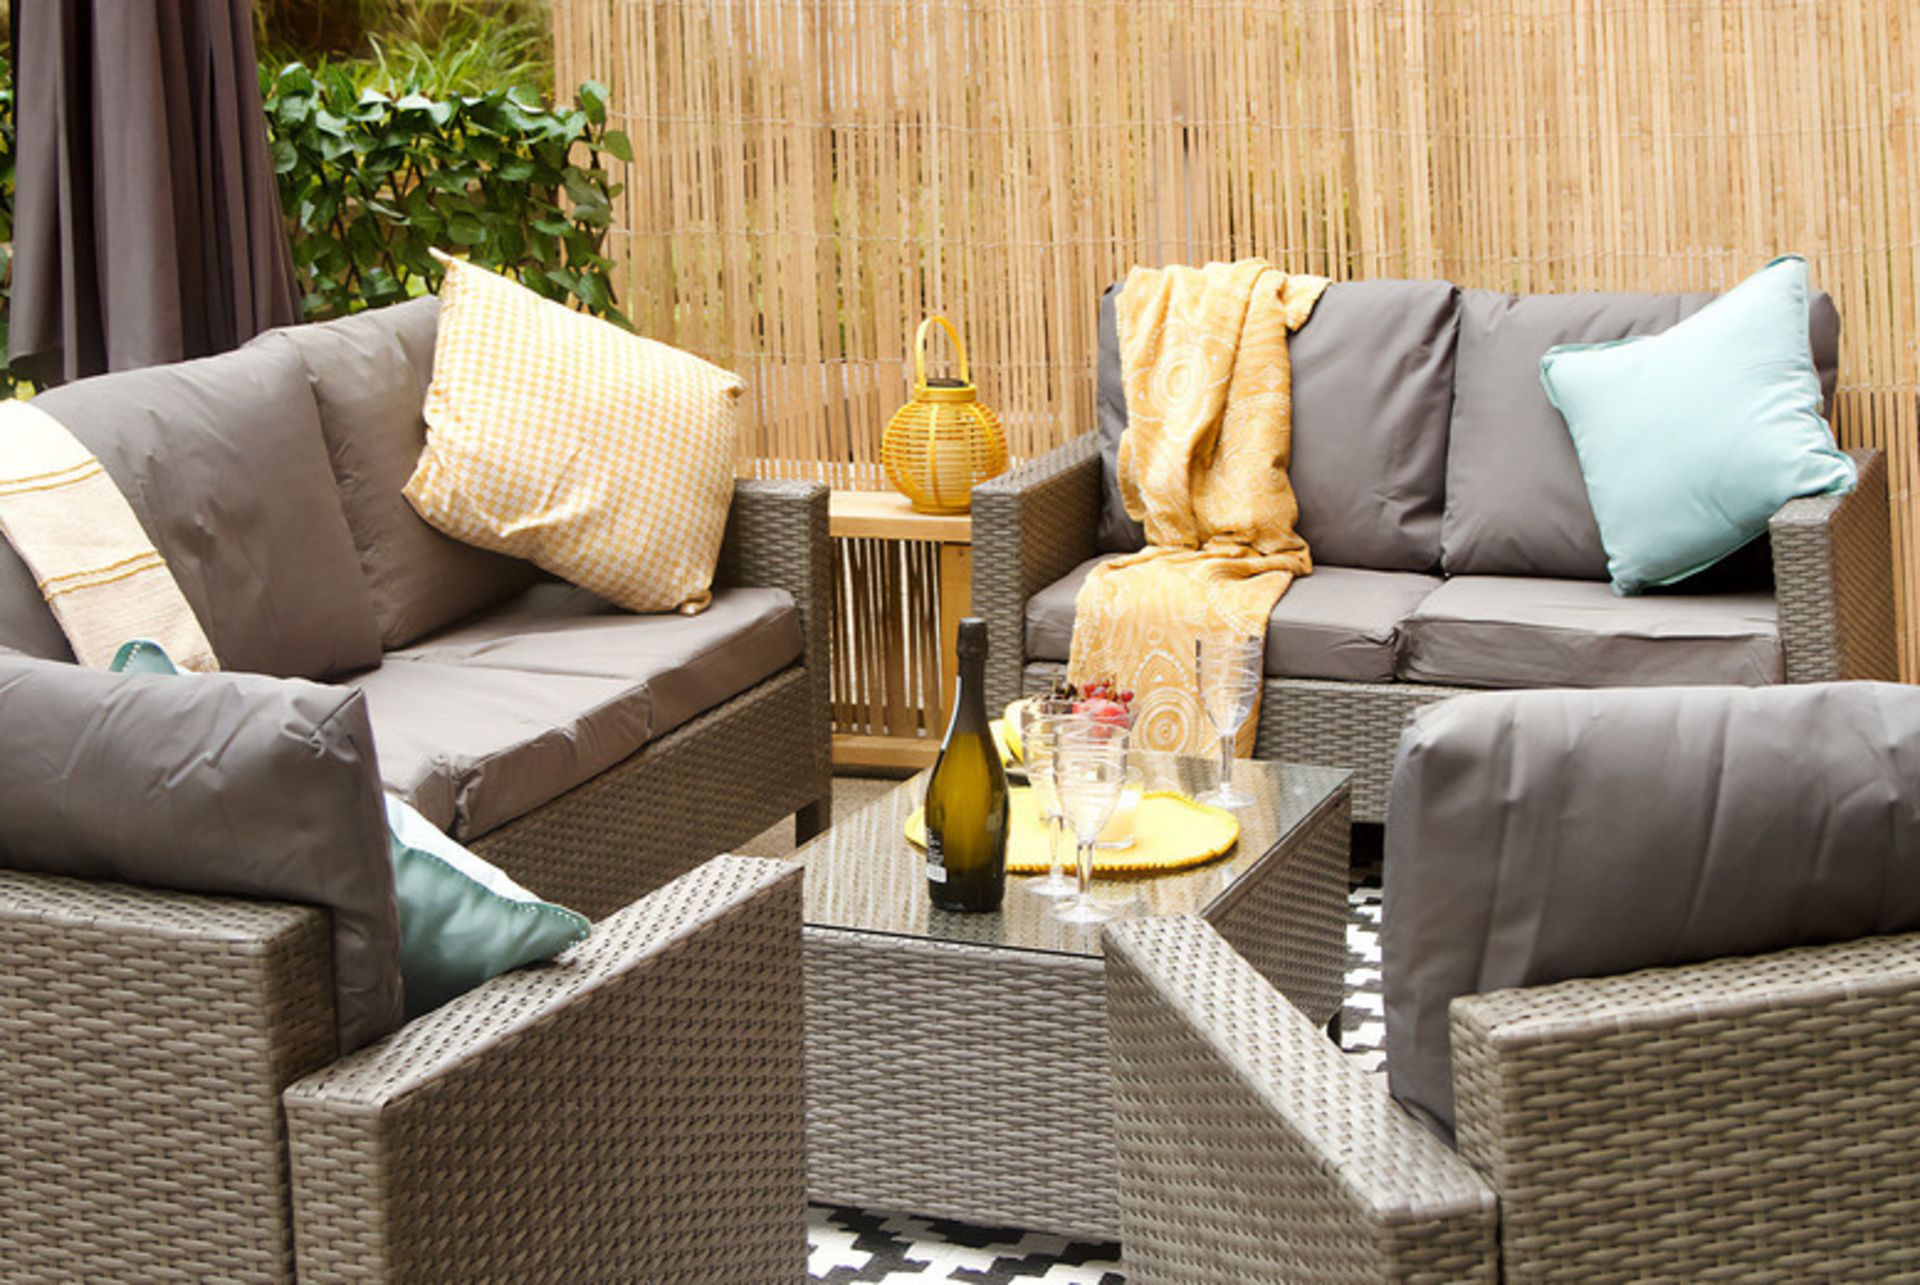 FREE DELIVERY - 8-SEATER RATTAN CHAIR & SOFA GARDEN FURNITURE SET - GREY - Image 2 of 5